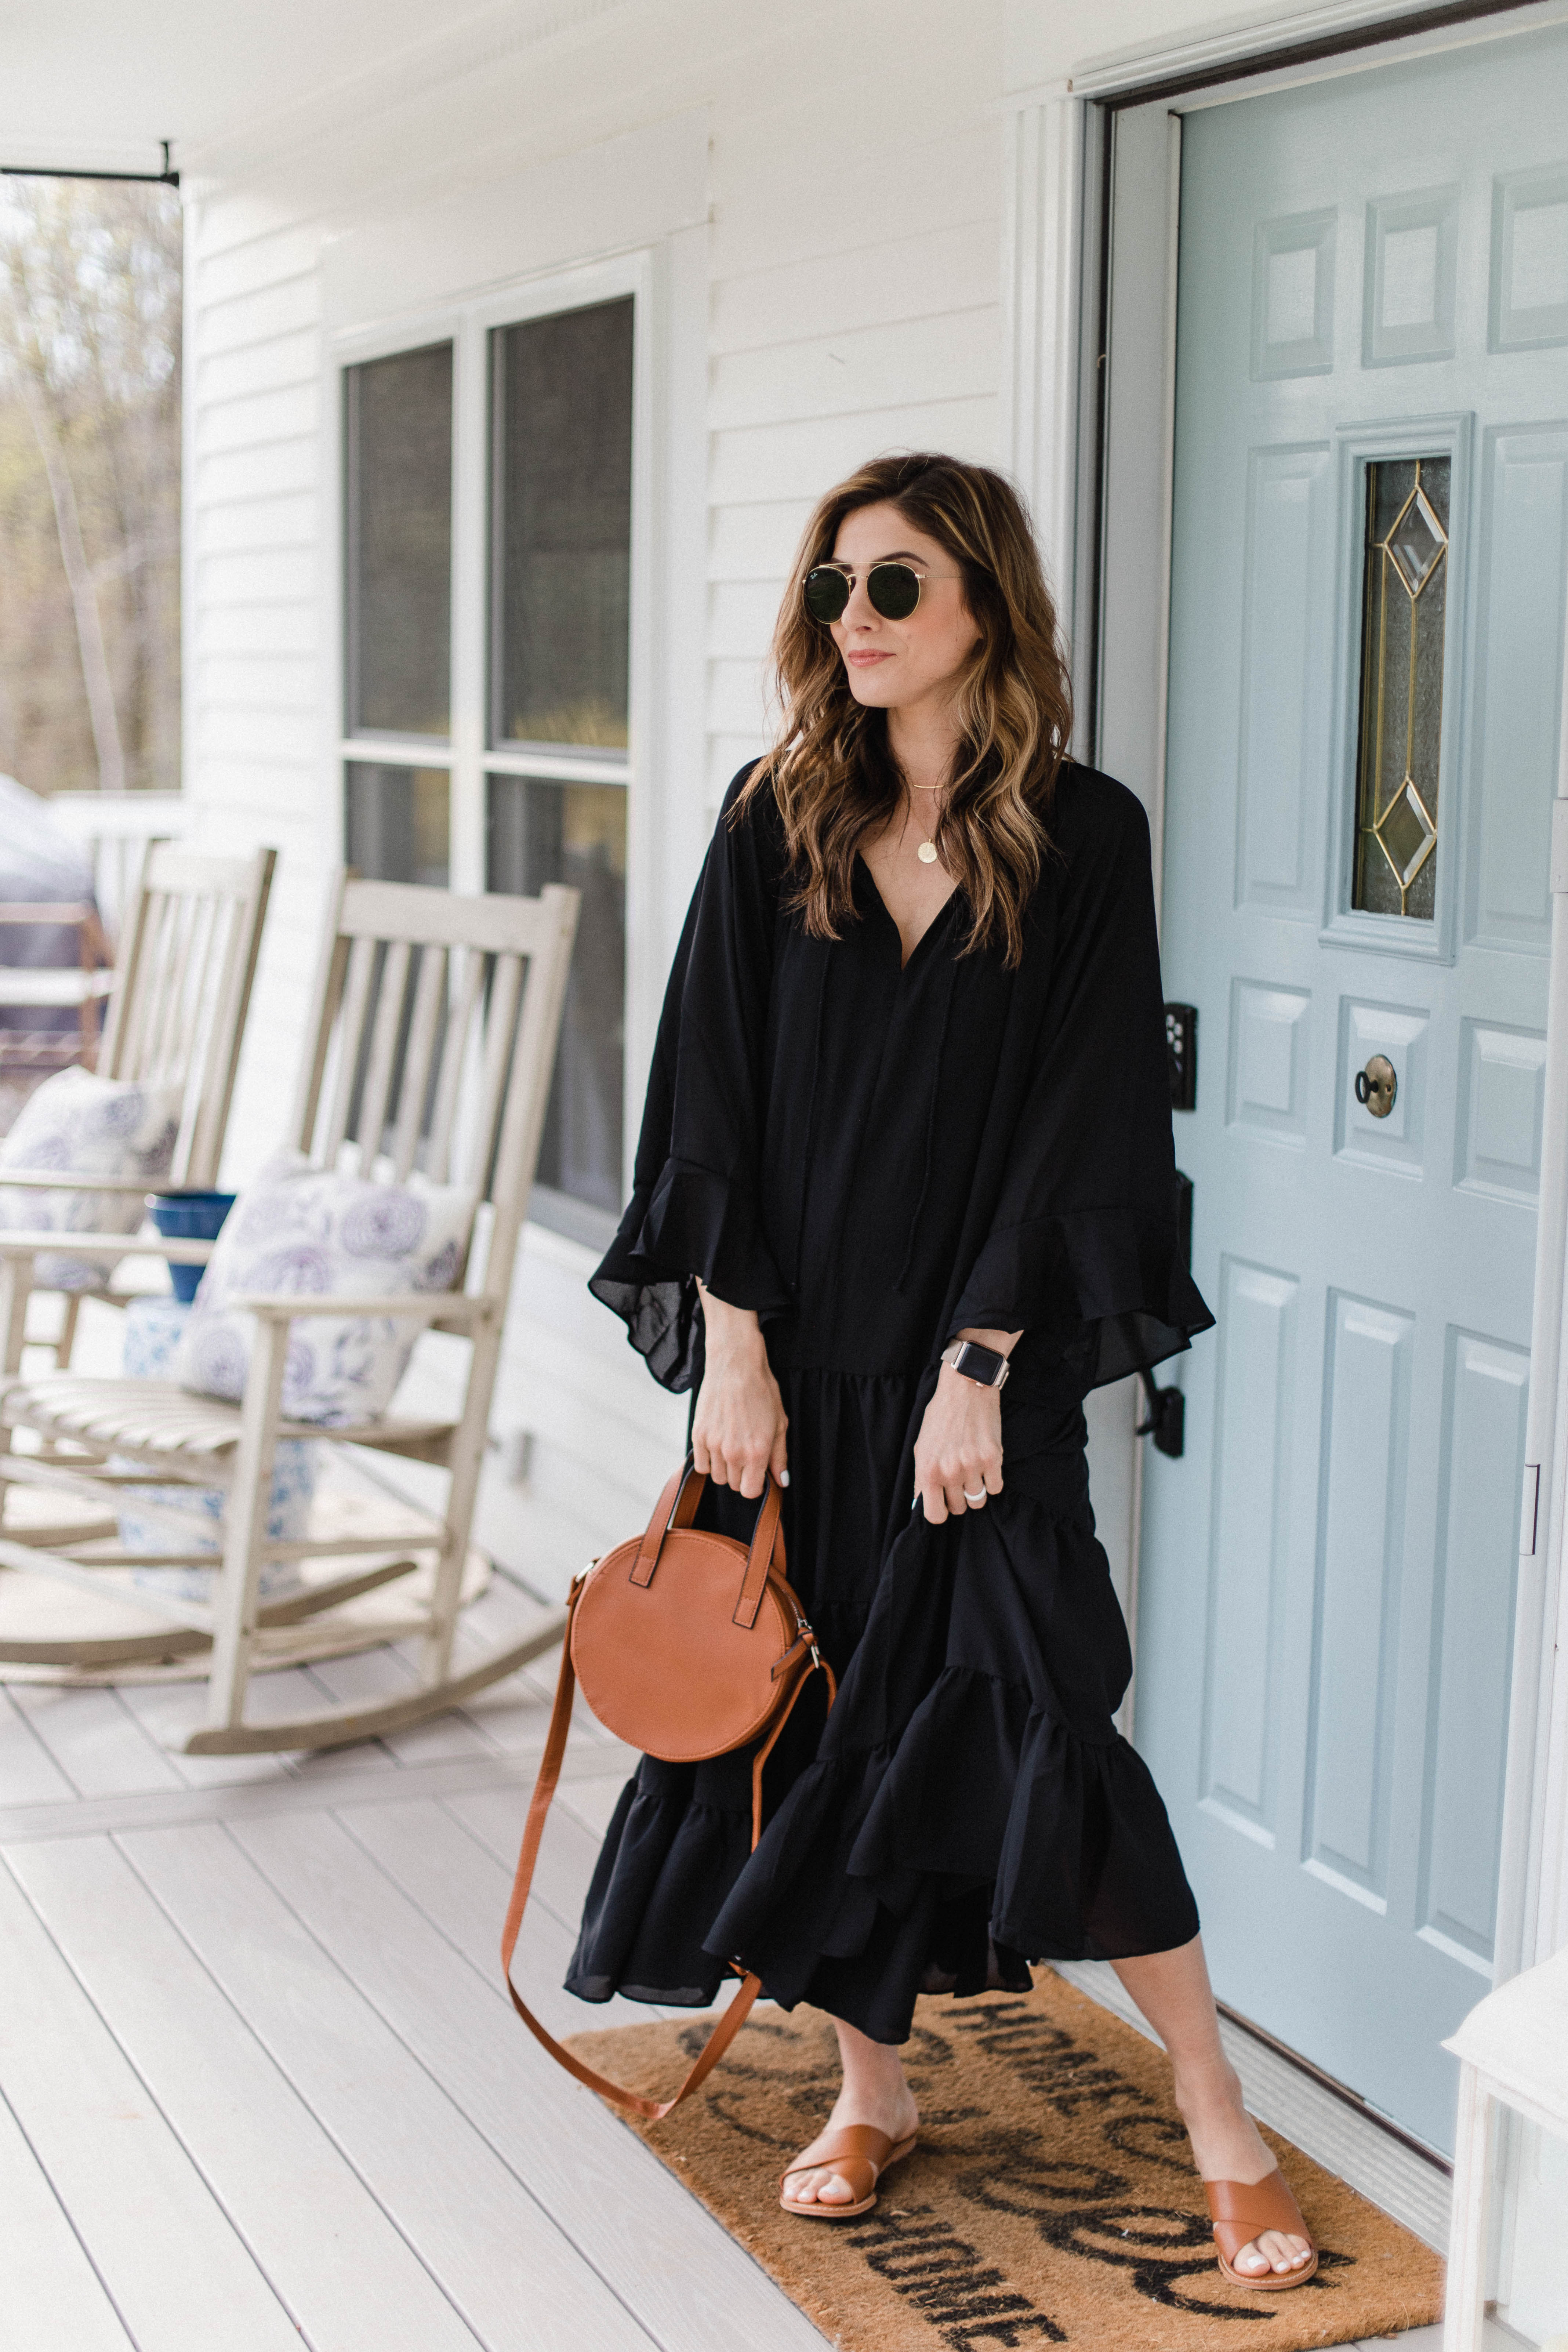 Connecticut life and style blogger Lauren McBride shares 3 spring wardrobe essentials that are budget friendly and versatile!